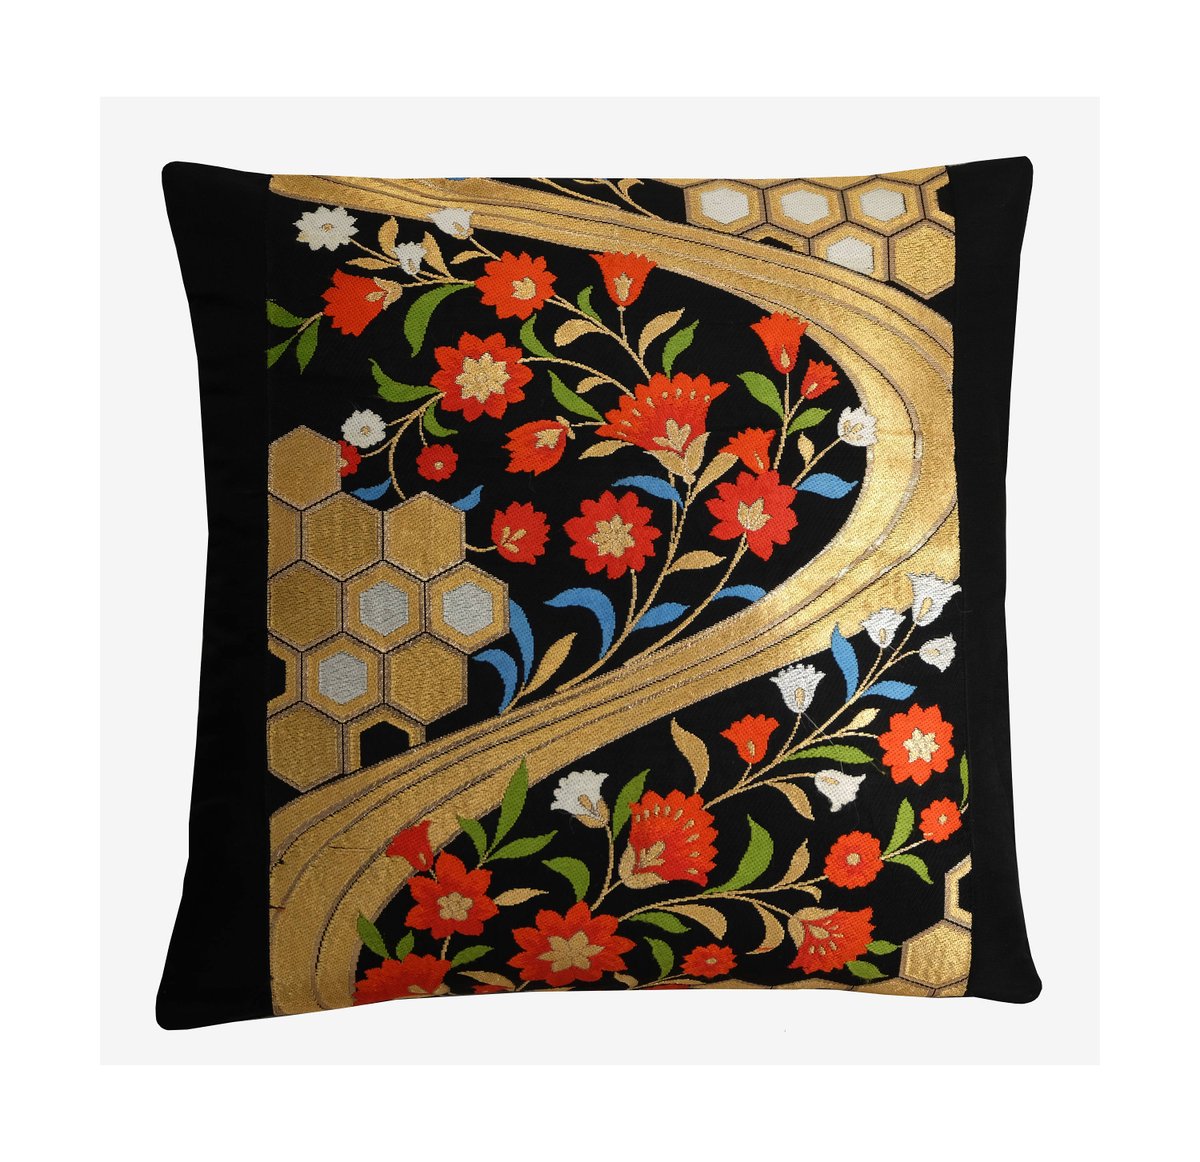 Black Floral Pillow 16x16, Japanese Silk Cushion Cover, Asian Home Decor, Fathers Day Gift - Free Shipping UK tuppu.net/7b3ff3b8 #Etsy #Diversecushions #LuxuryPillows